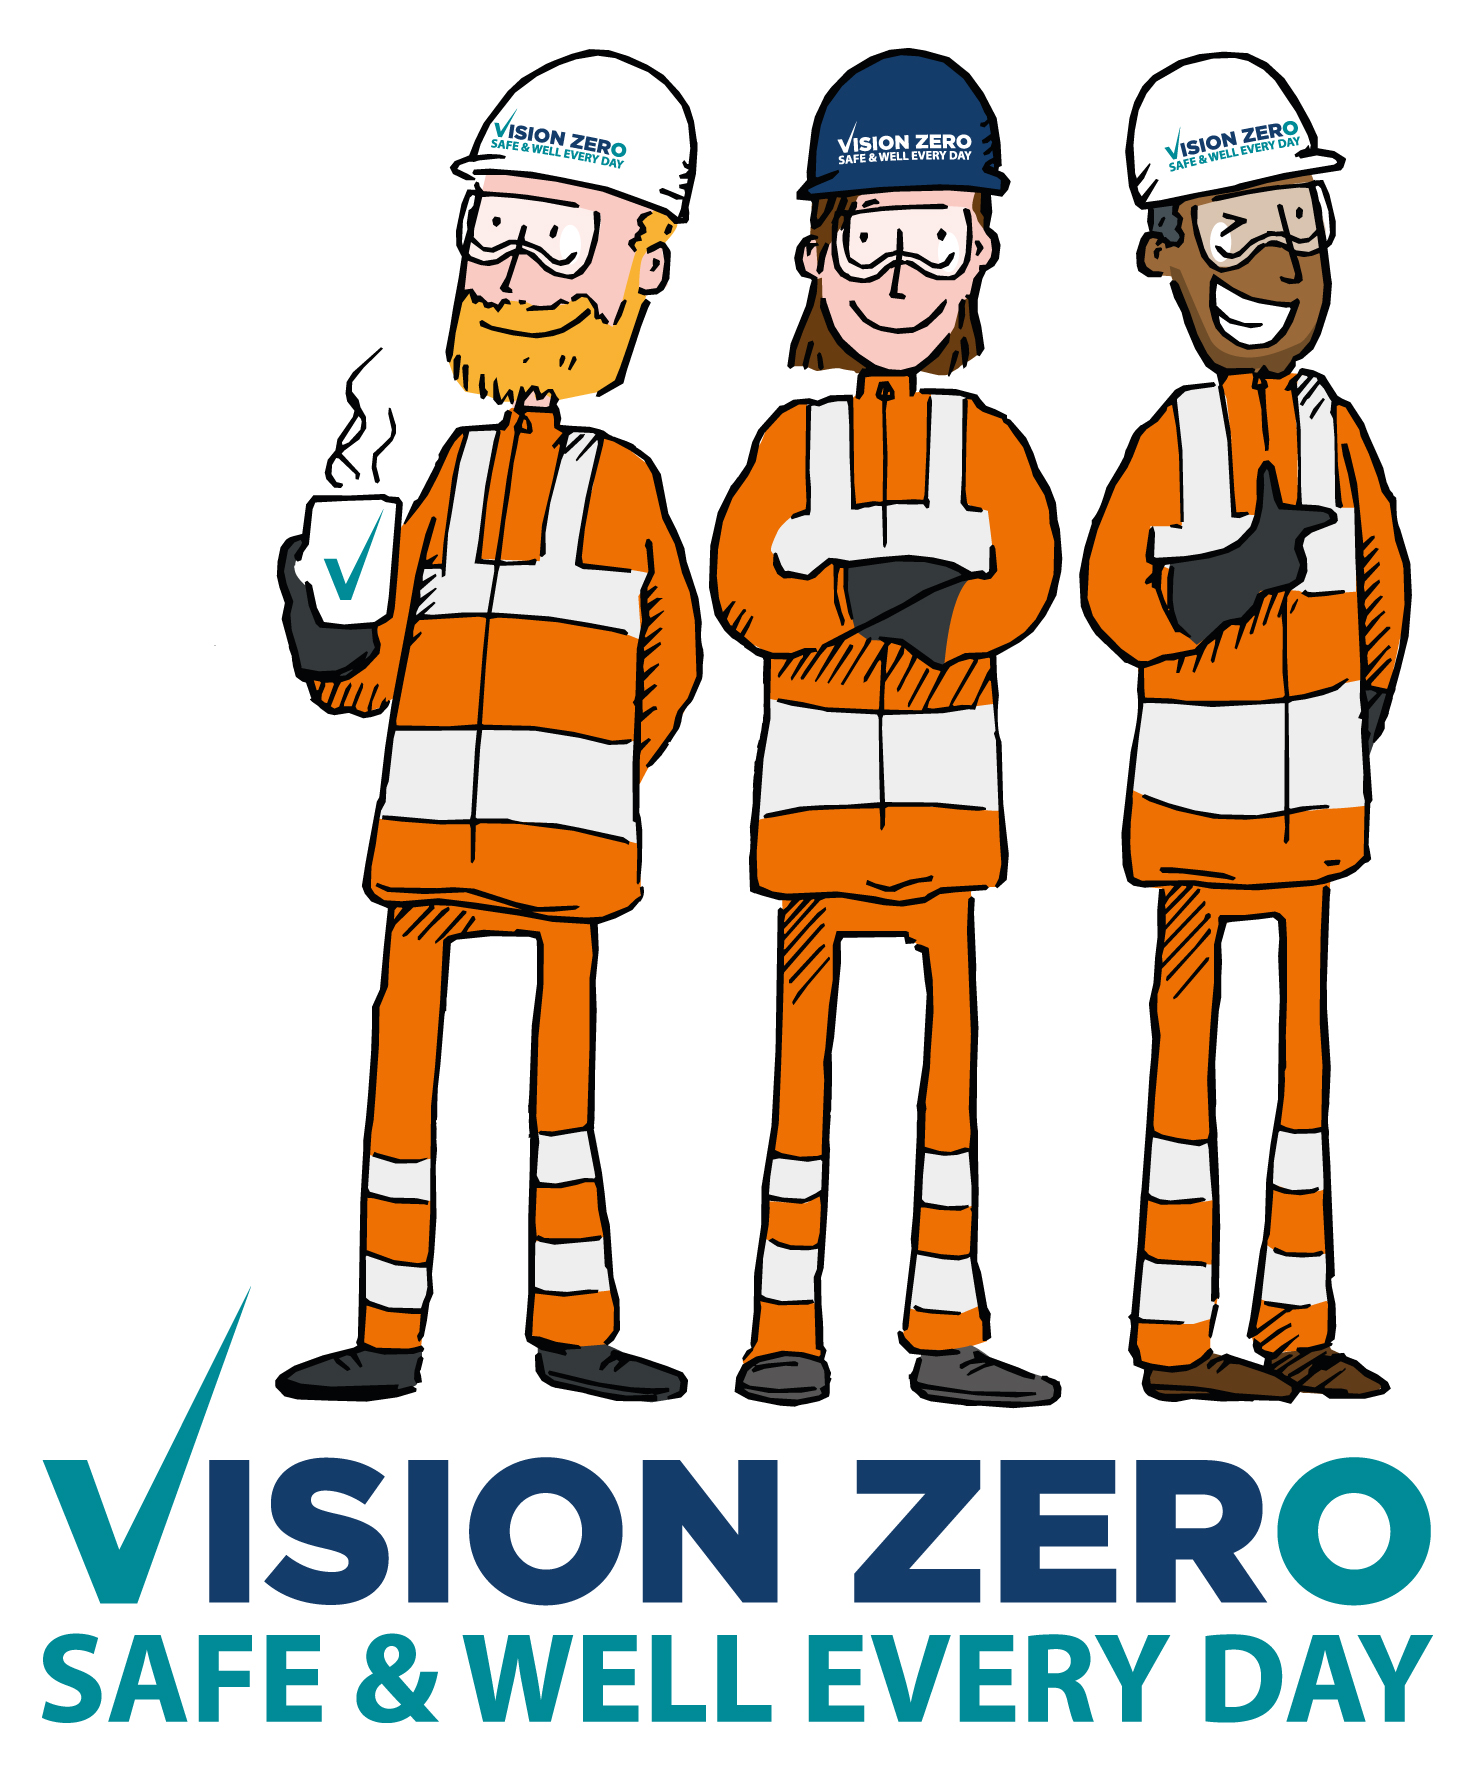 Hills Quarry Products is taking part in the MPA's ‘Targeting the Fatal 6 to achieve Vision Zero’ initiative